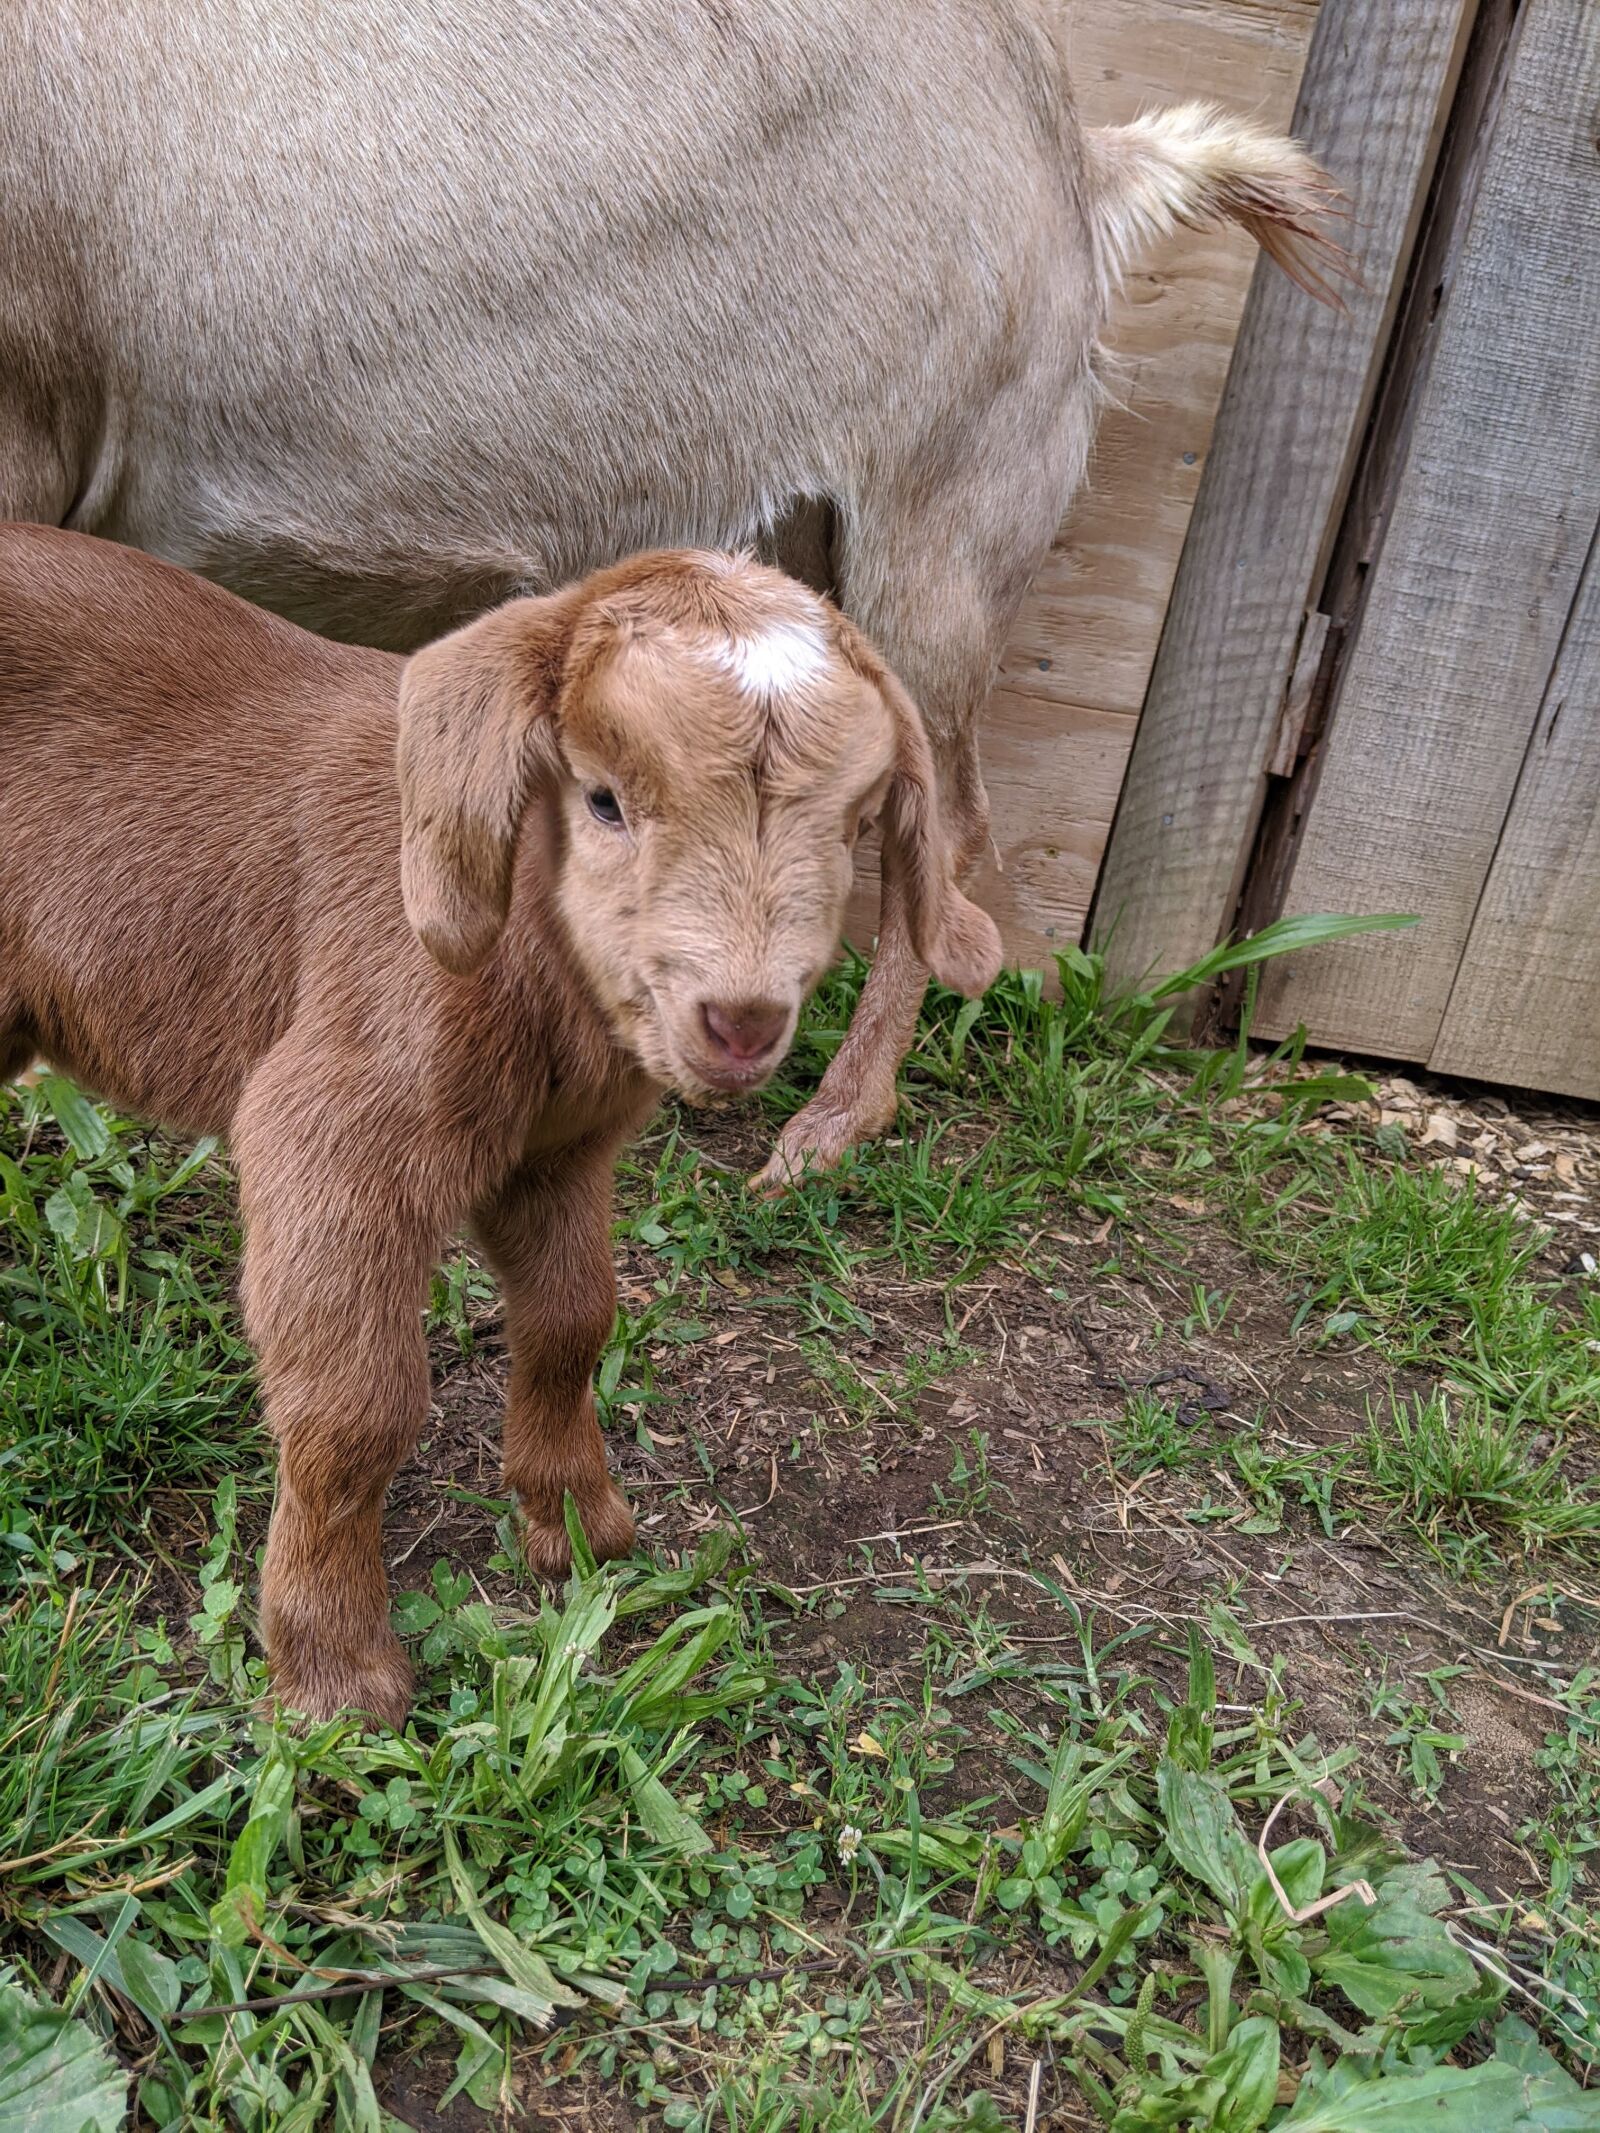 Google Pixel 3a sample photo. Goat, brown, baby photography